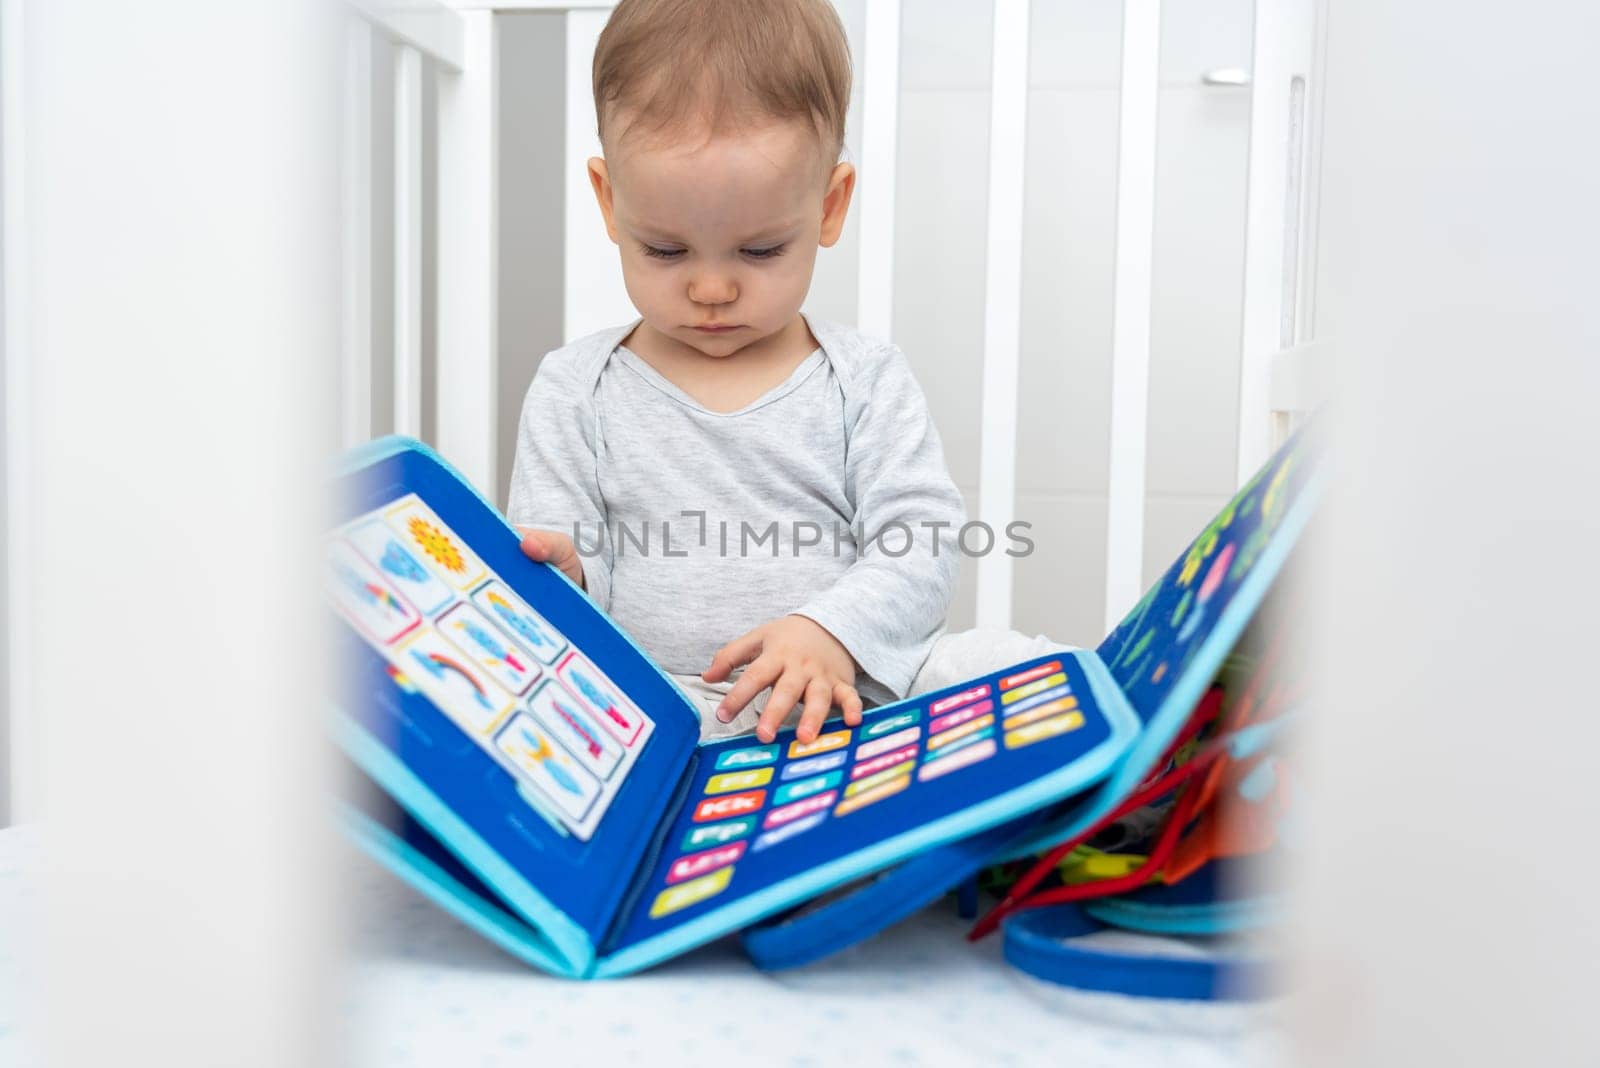 Baby playing with montessori quiet book sitting in a crib. Concept of smart books and modern educational toys by Mariakray